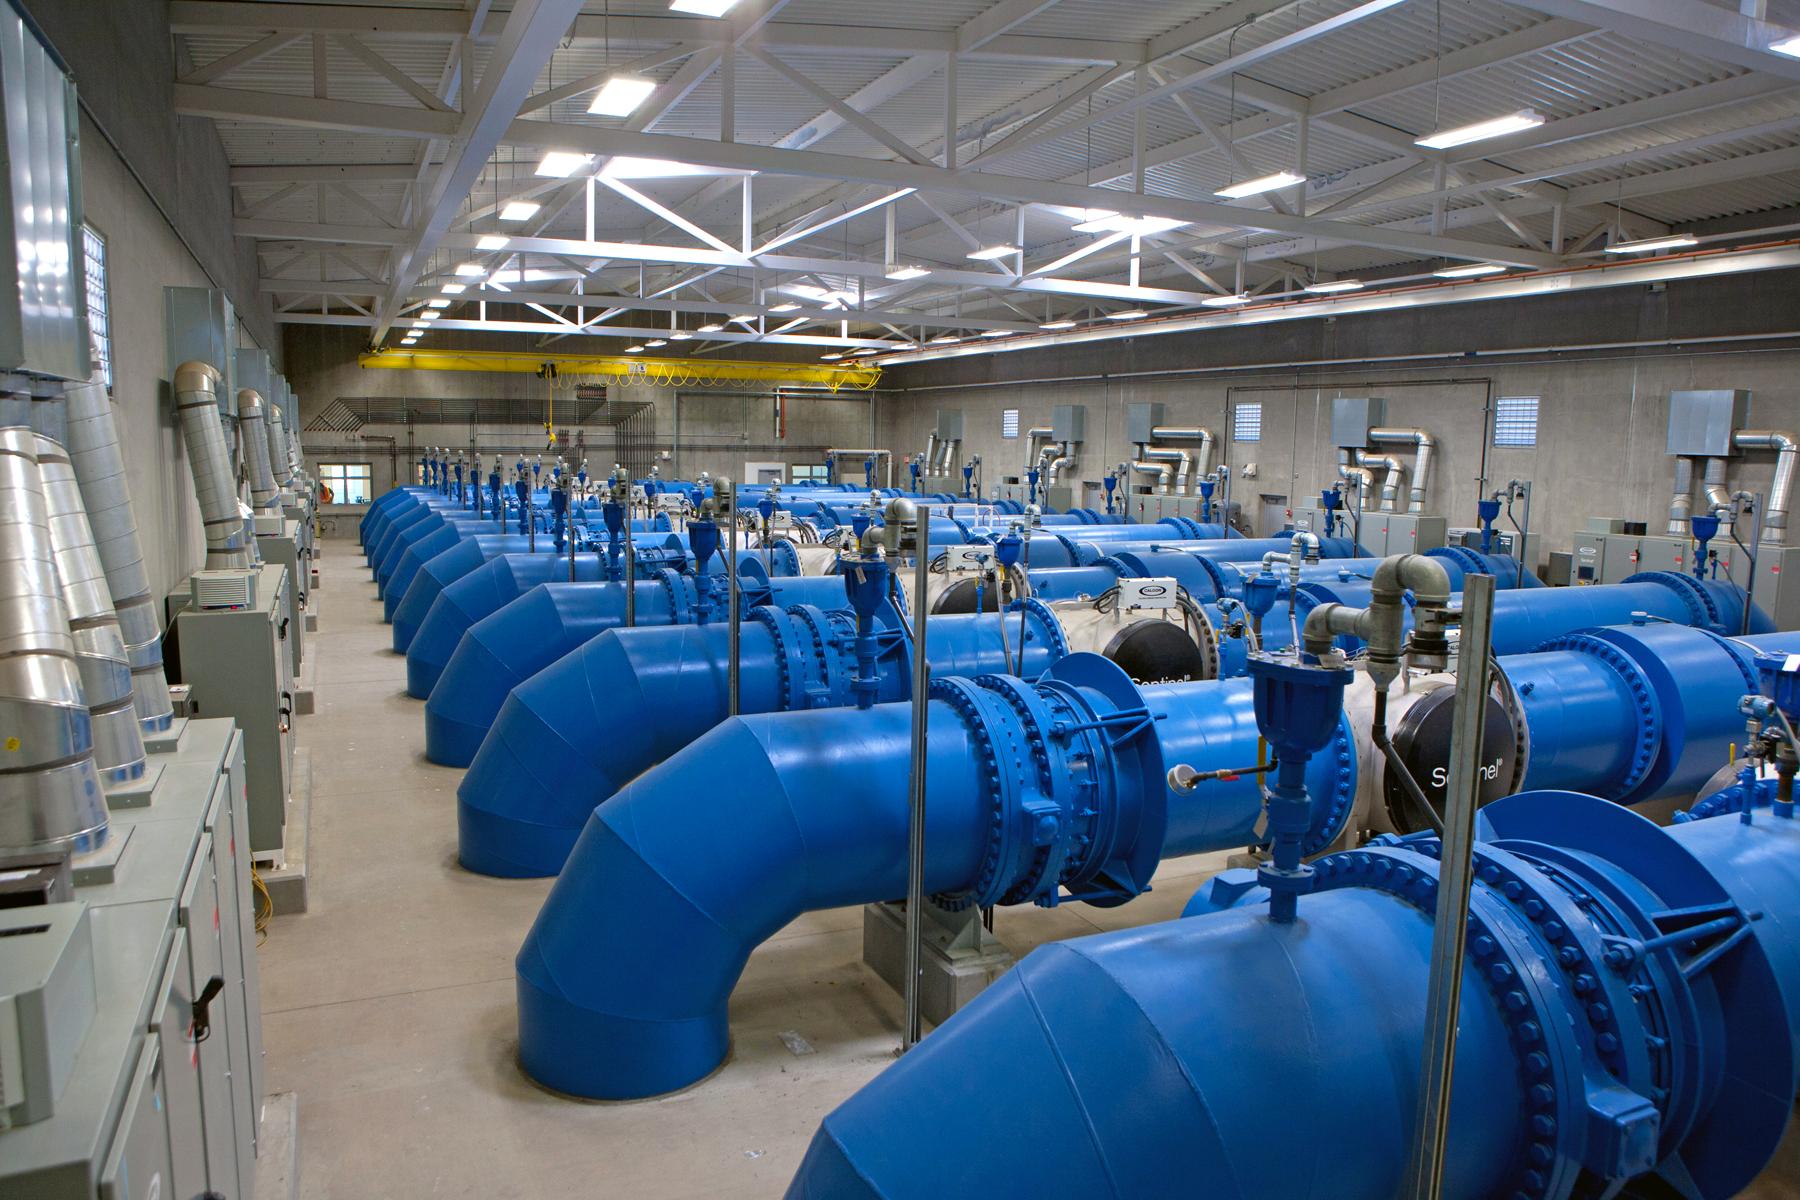 The impact of COVID-19 on water and wastewater utilities